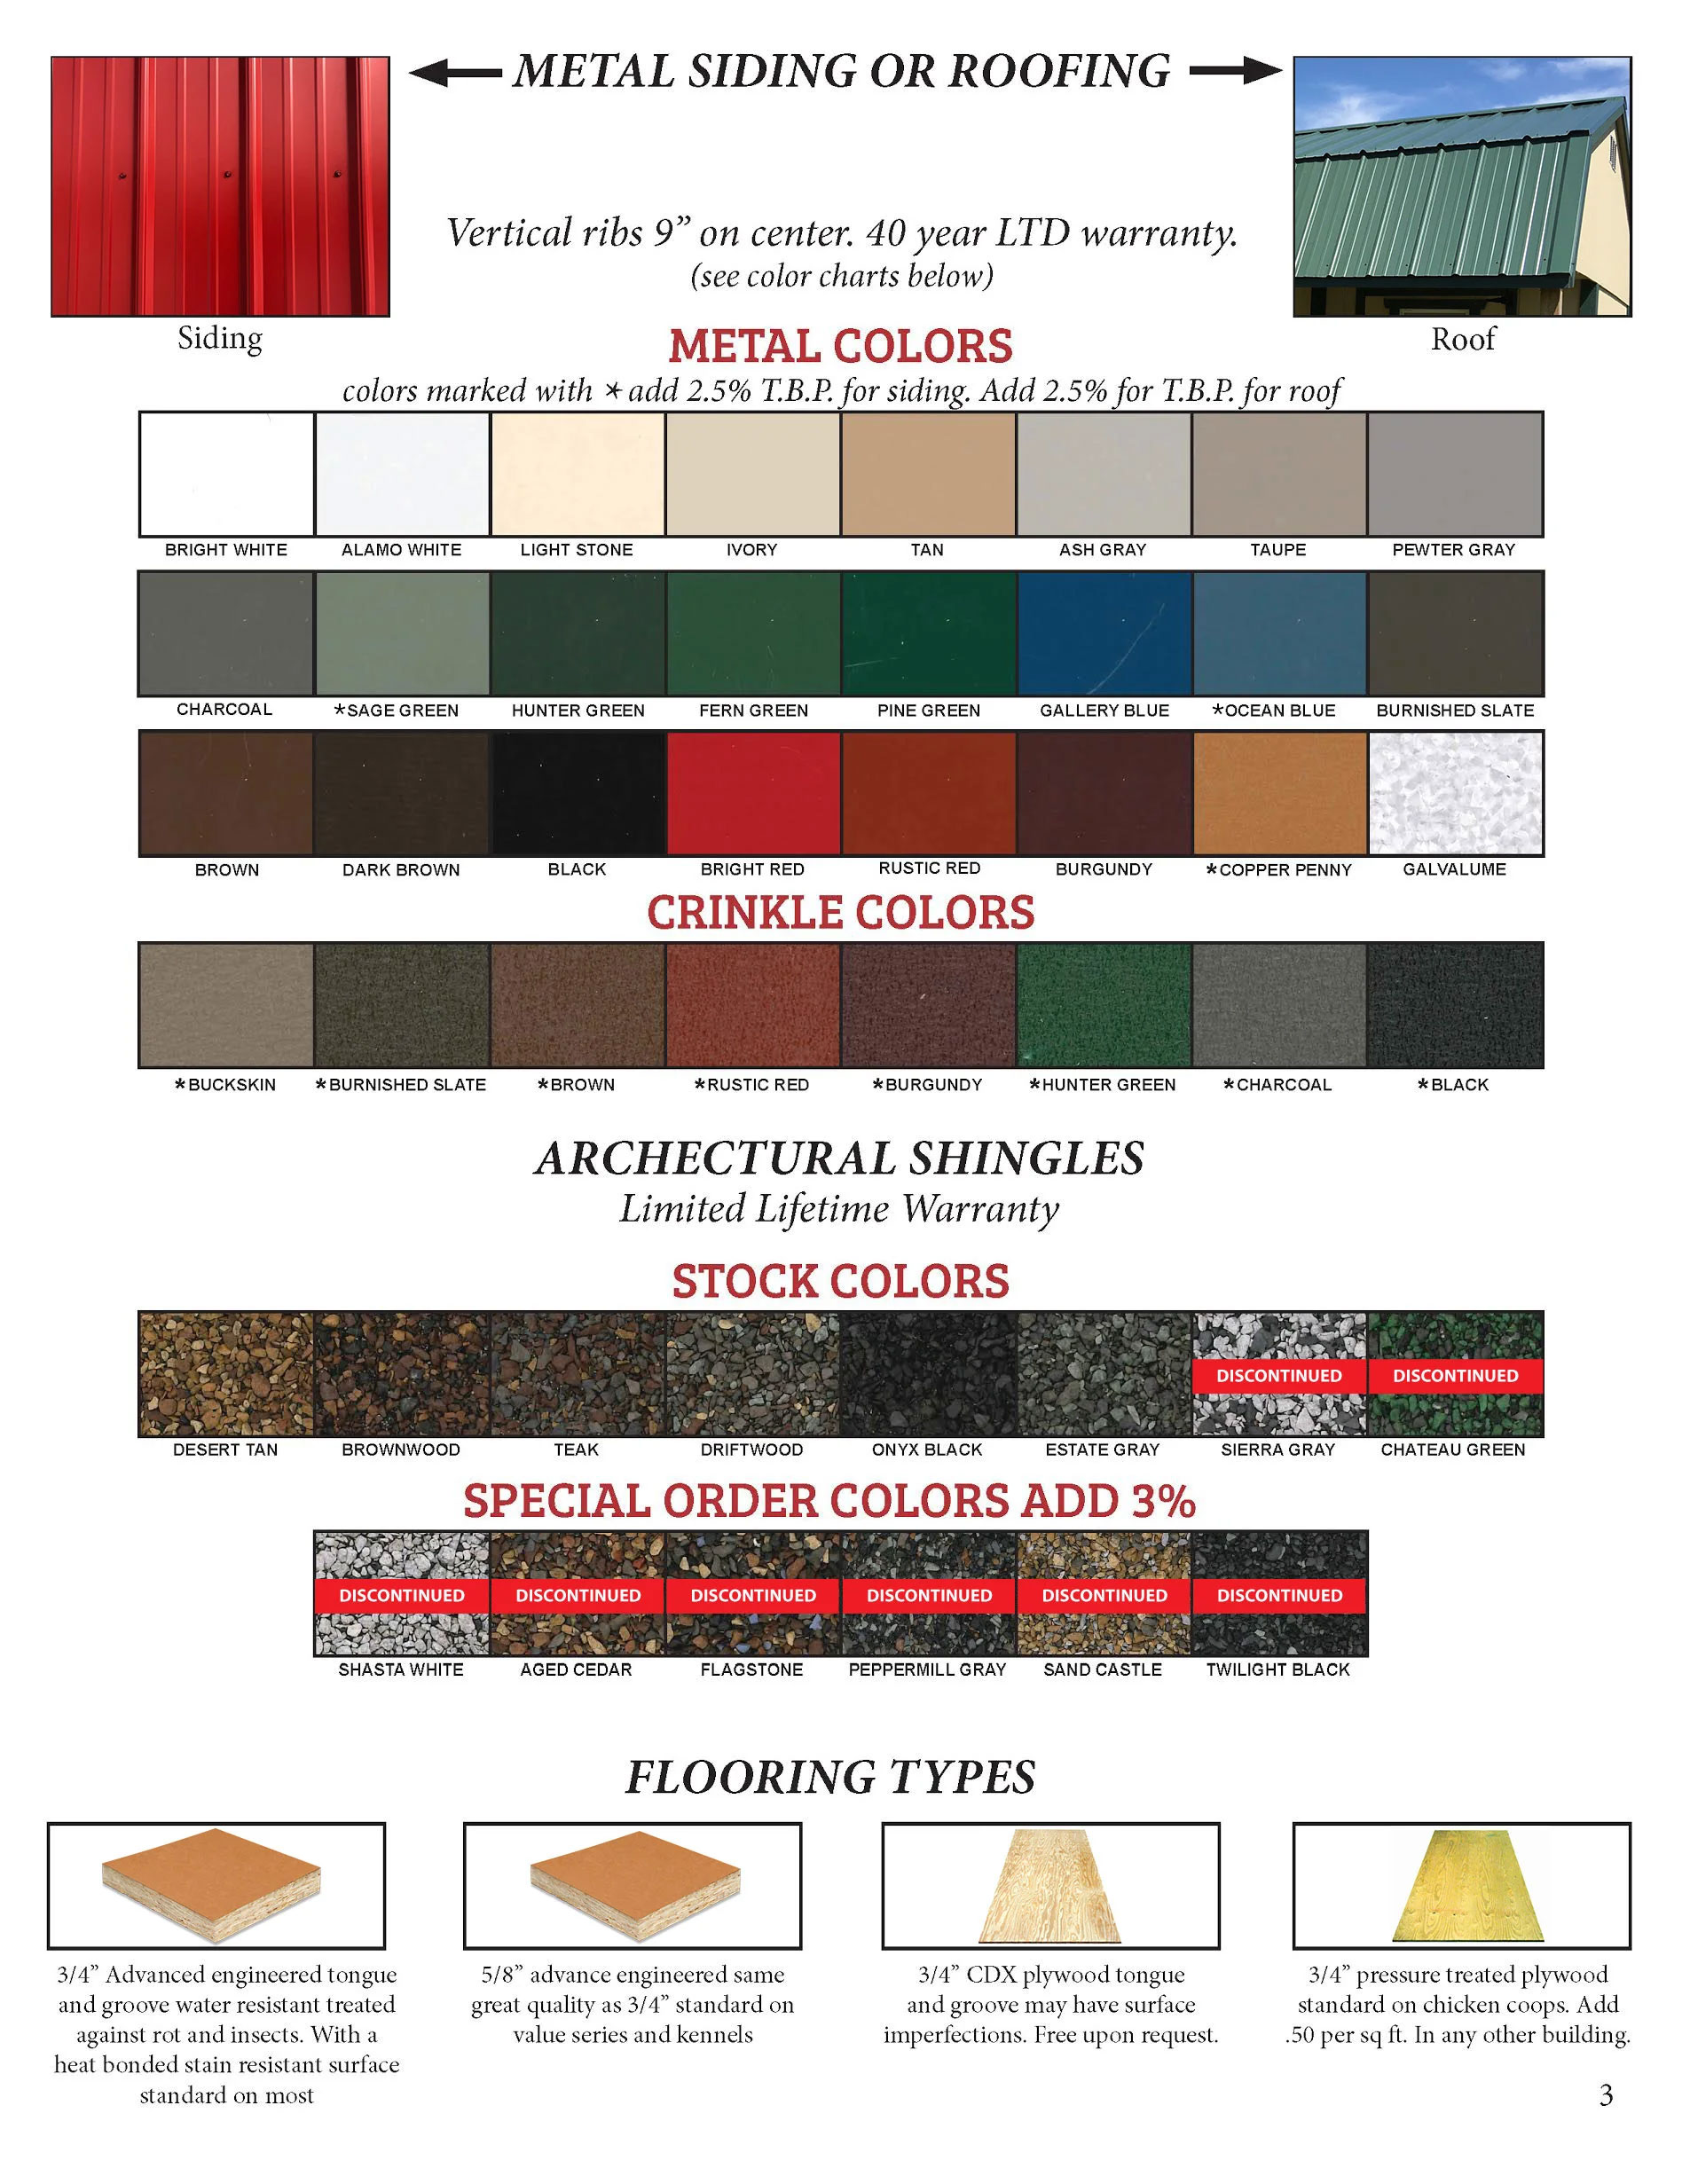 Diagram showing metal siding, roofing, and flooring options for sheds